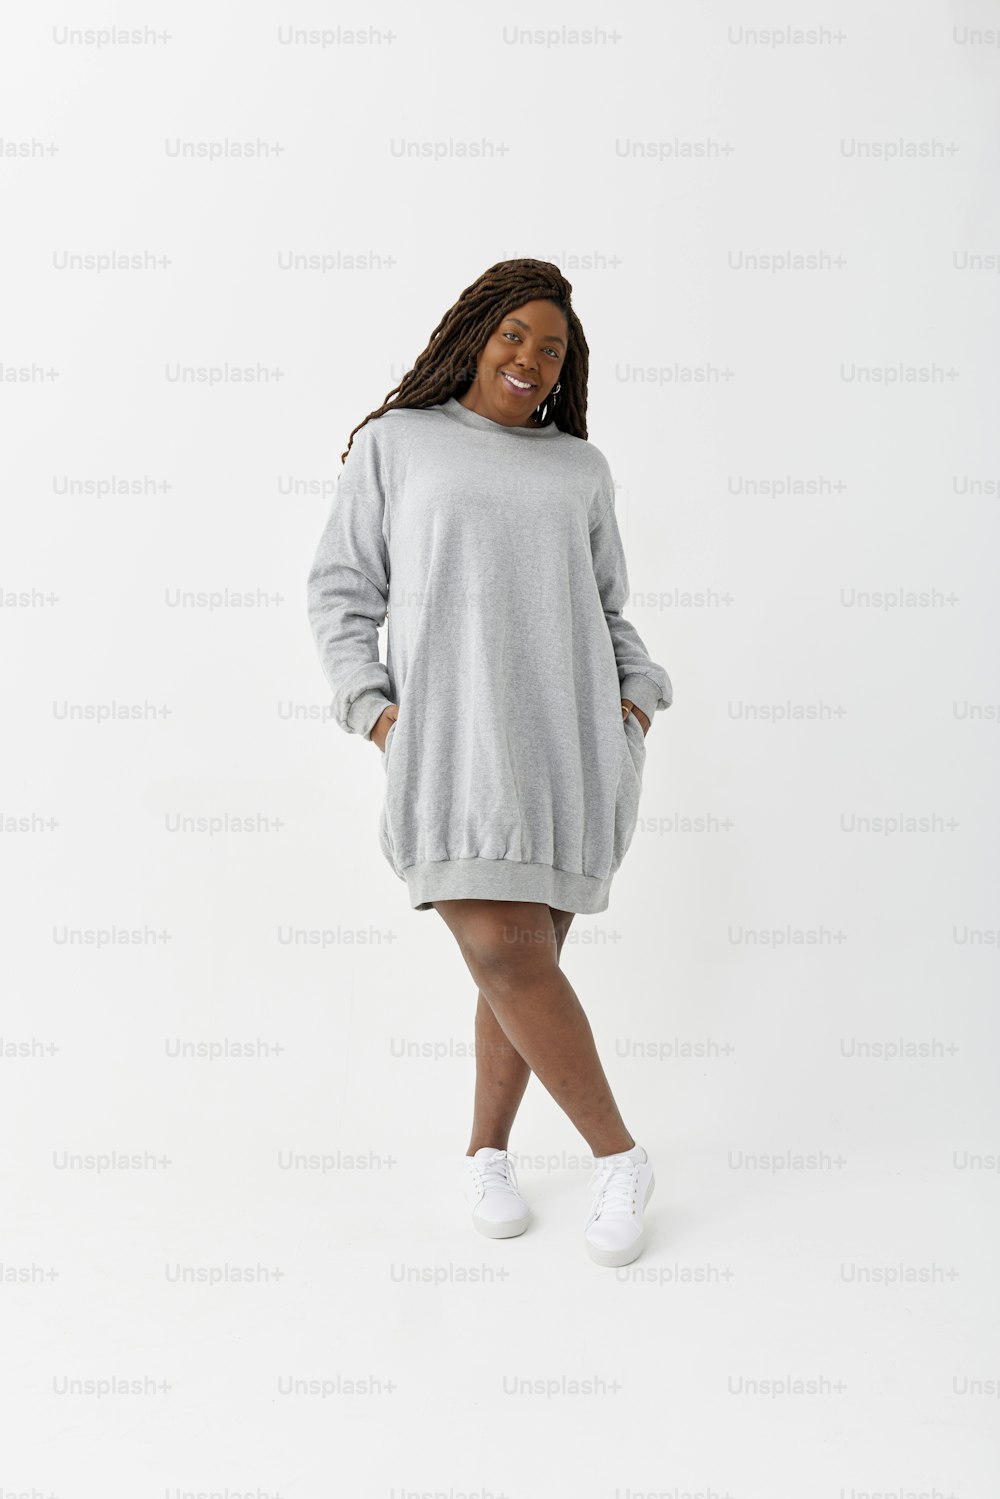 a woman wearing a grey sweater dress and white tennis shoes